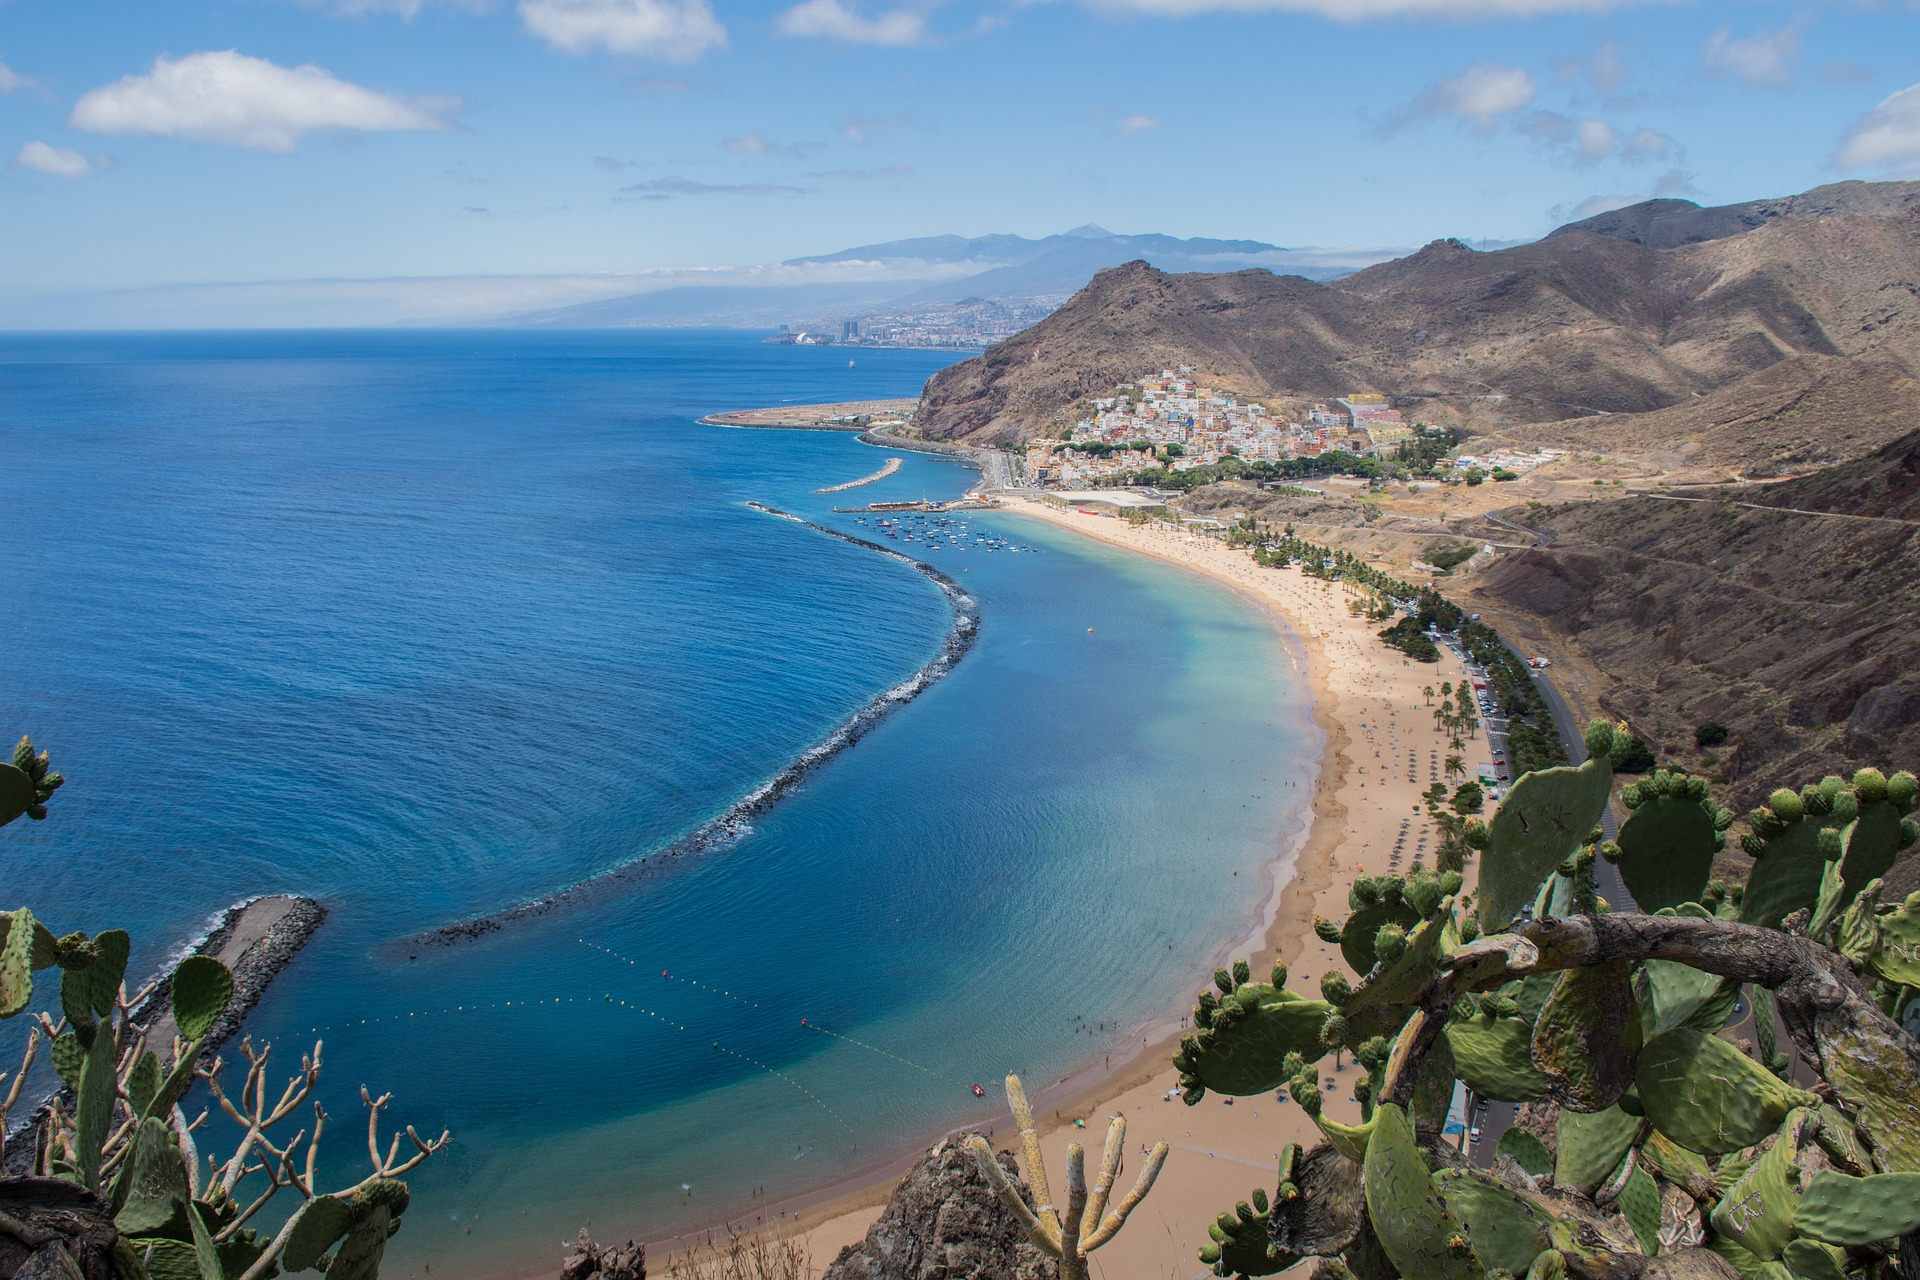 Destination image of Canaries